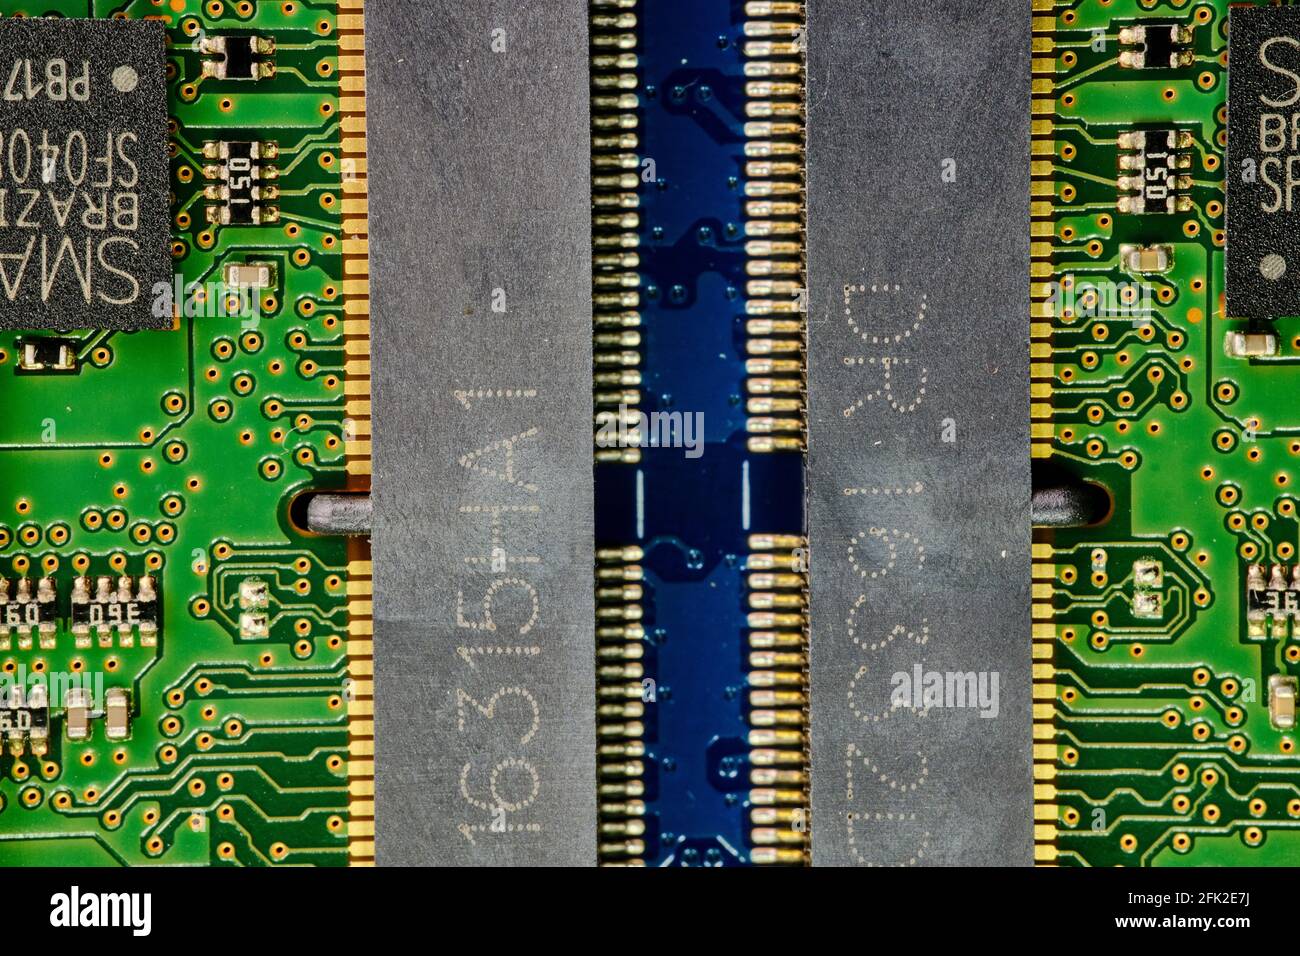 macro and closeup photos about microchips, processors, motherboard, inside an electronic device, a computer, notebook Stock Photo